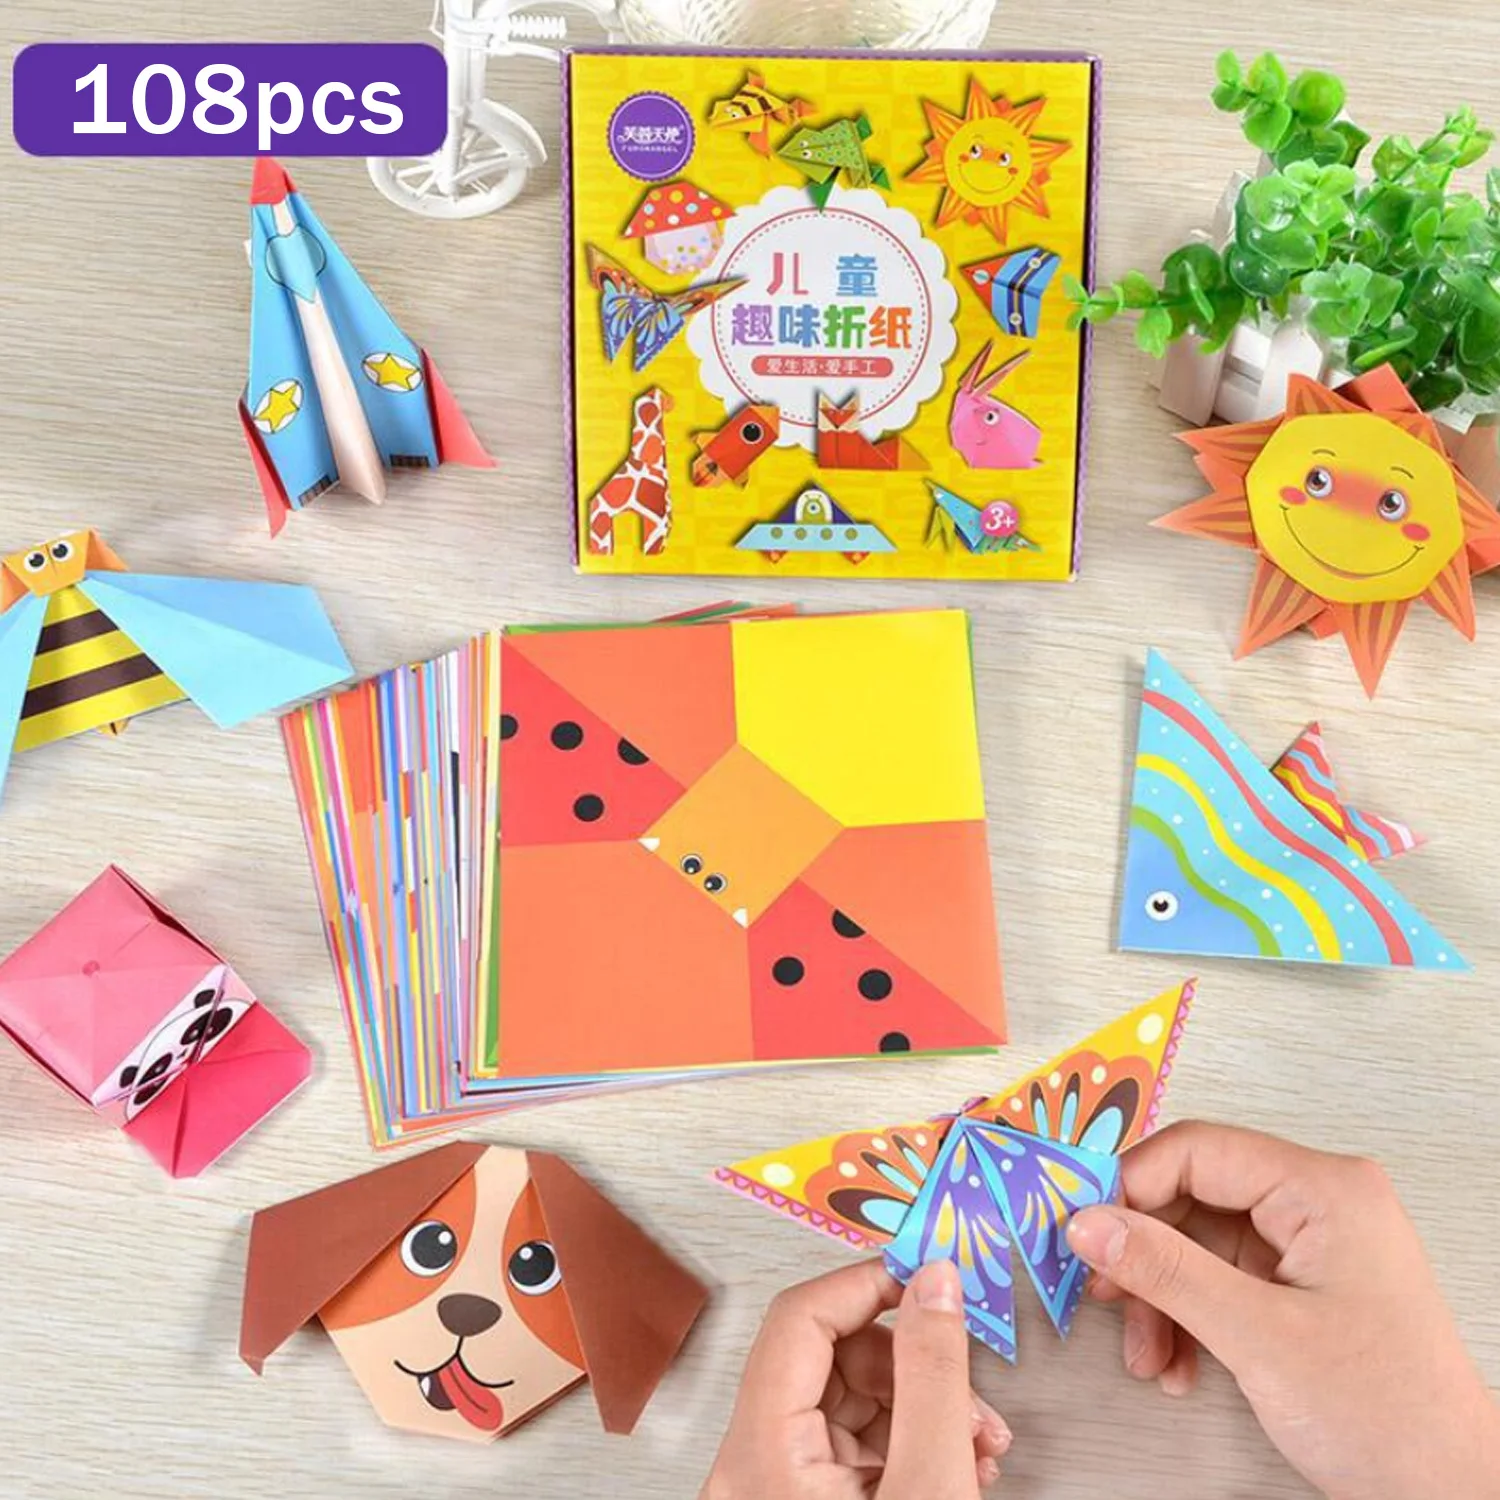 Origami Folding Toys for Kids 108 Folding Papers 54 Projects w/ Origami Book 